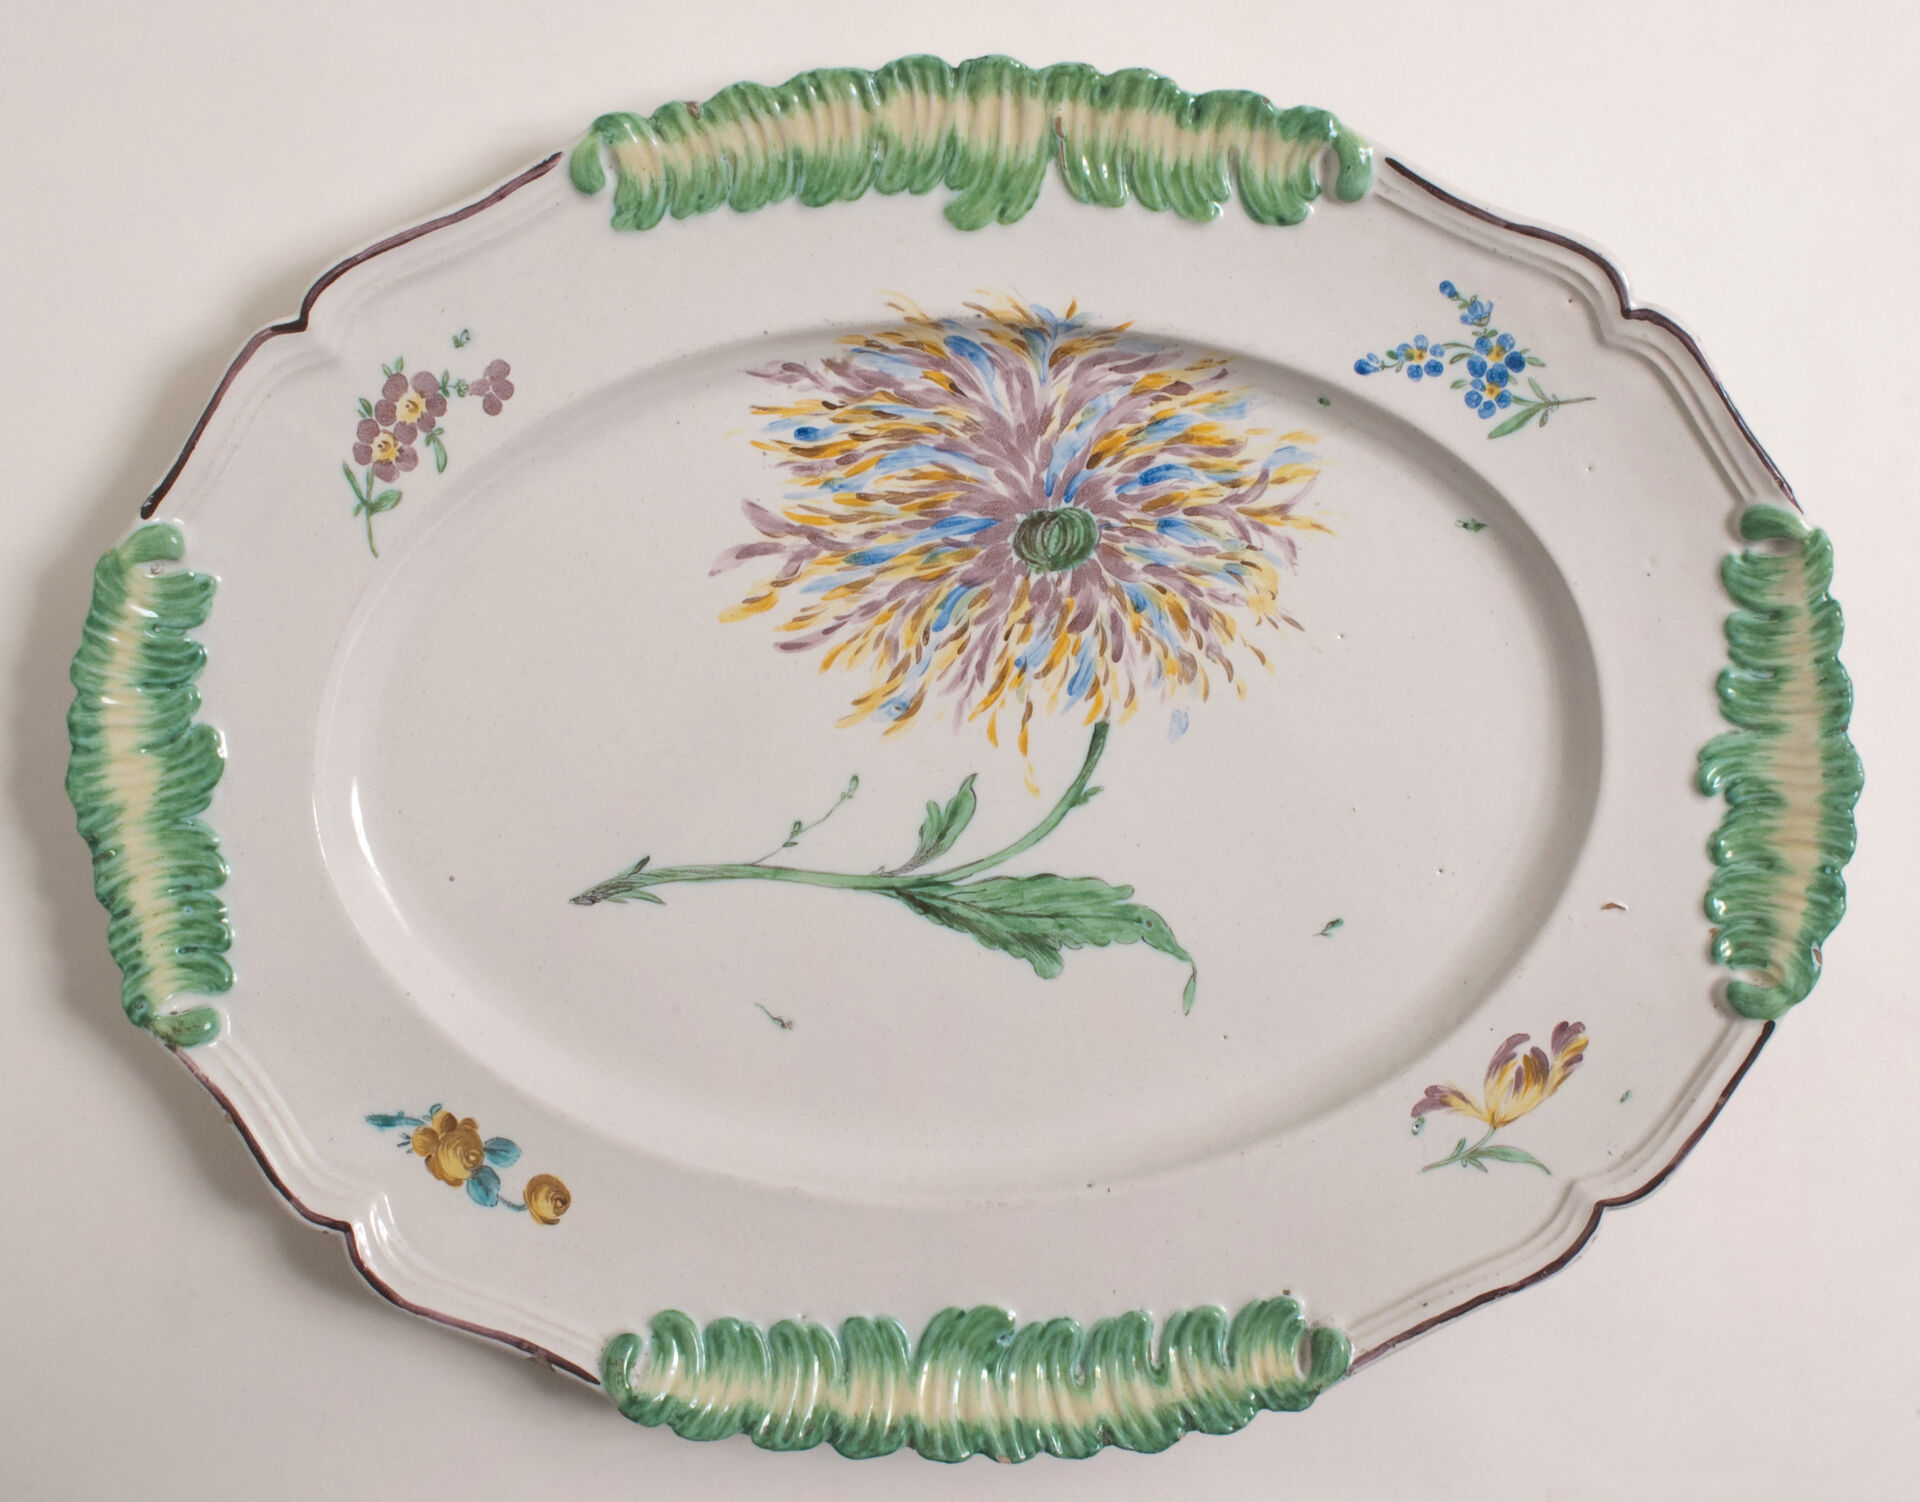 Dish, unknown Estonian artist active during the  late 18th century.